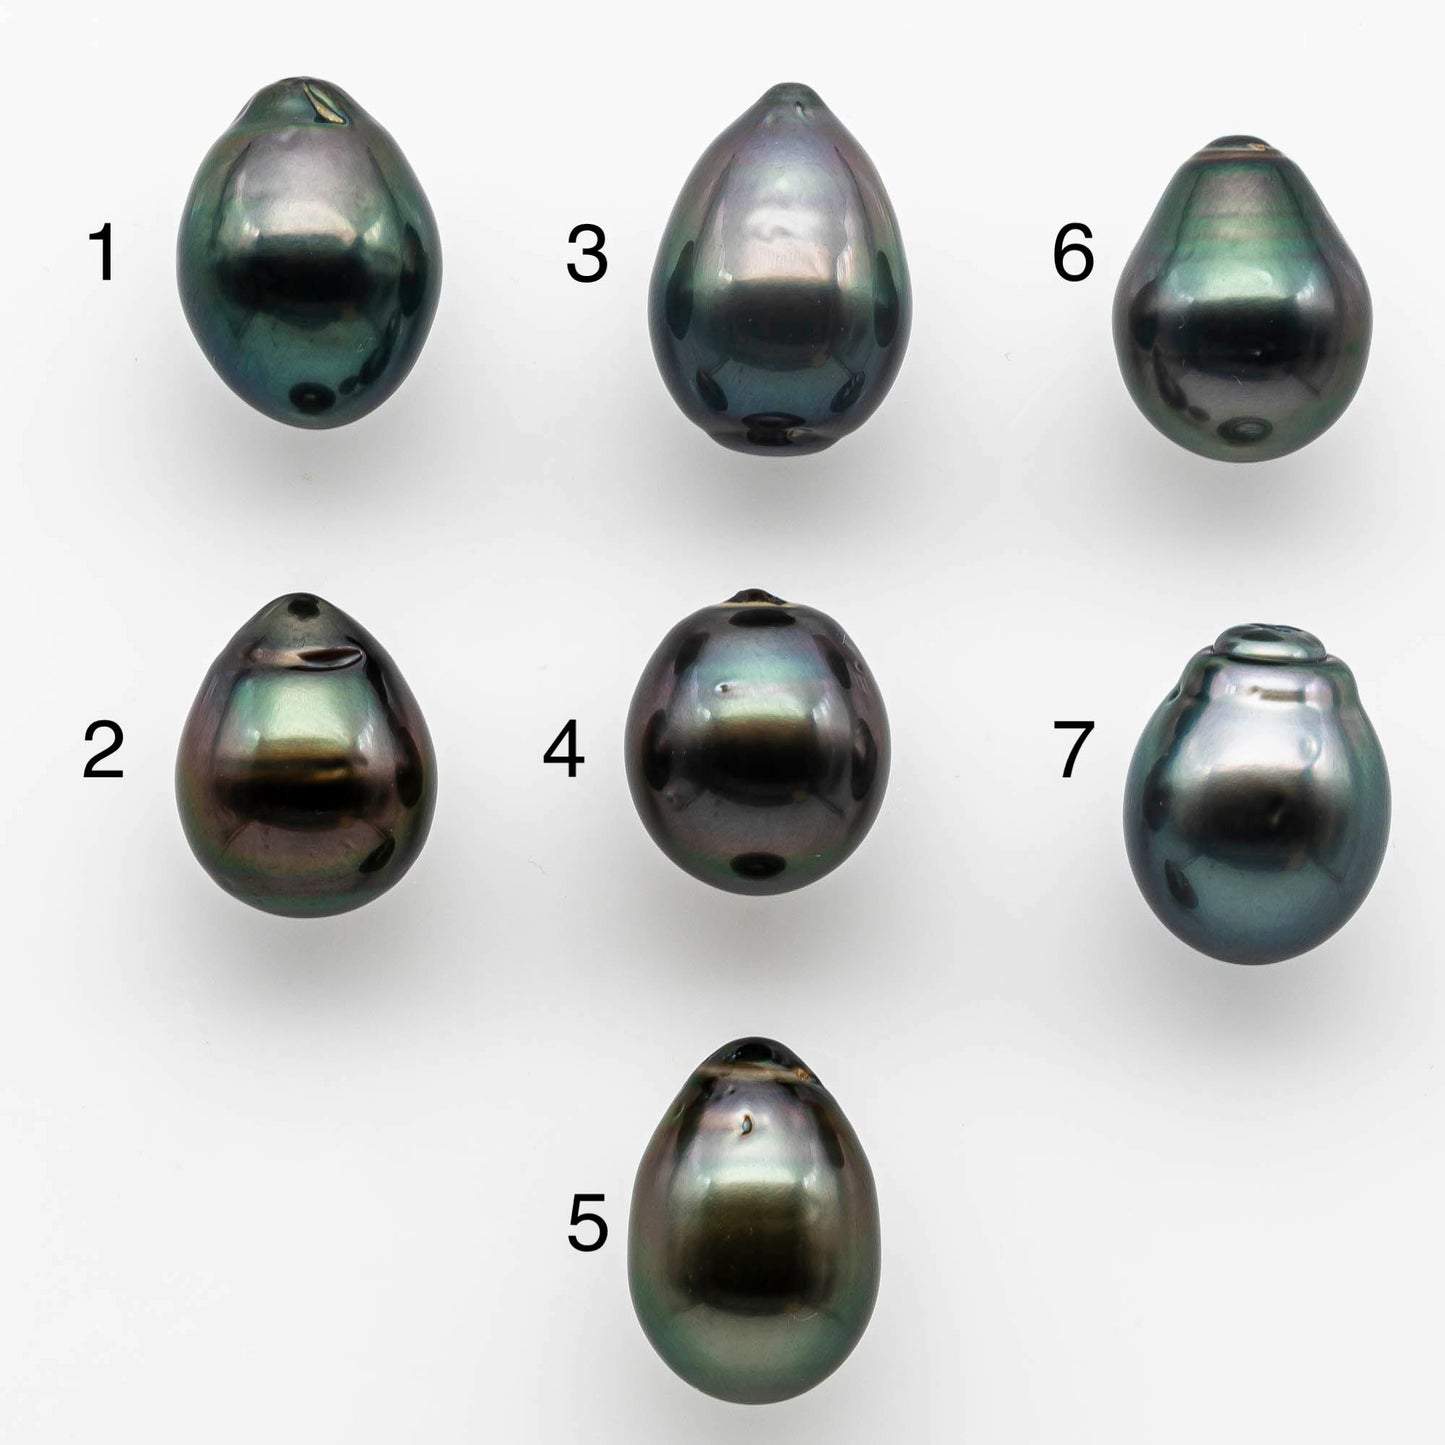 13-14mm Large Teardrop Tahitian Pearl in Loose Undrilled Natural Color and High Luster, One Single Piece, SKU # 1415TH